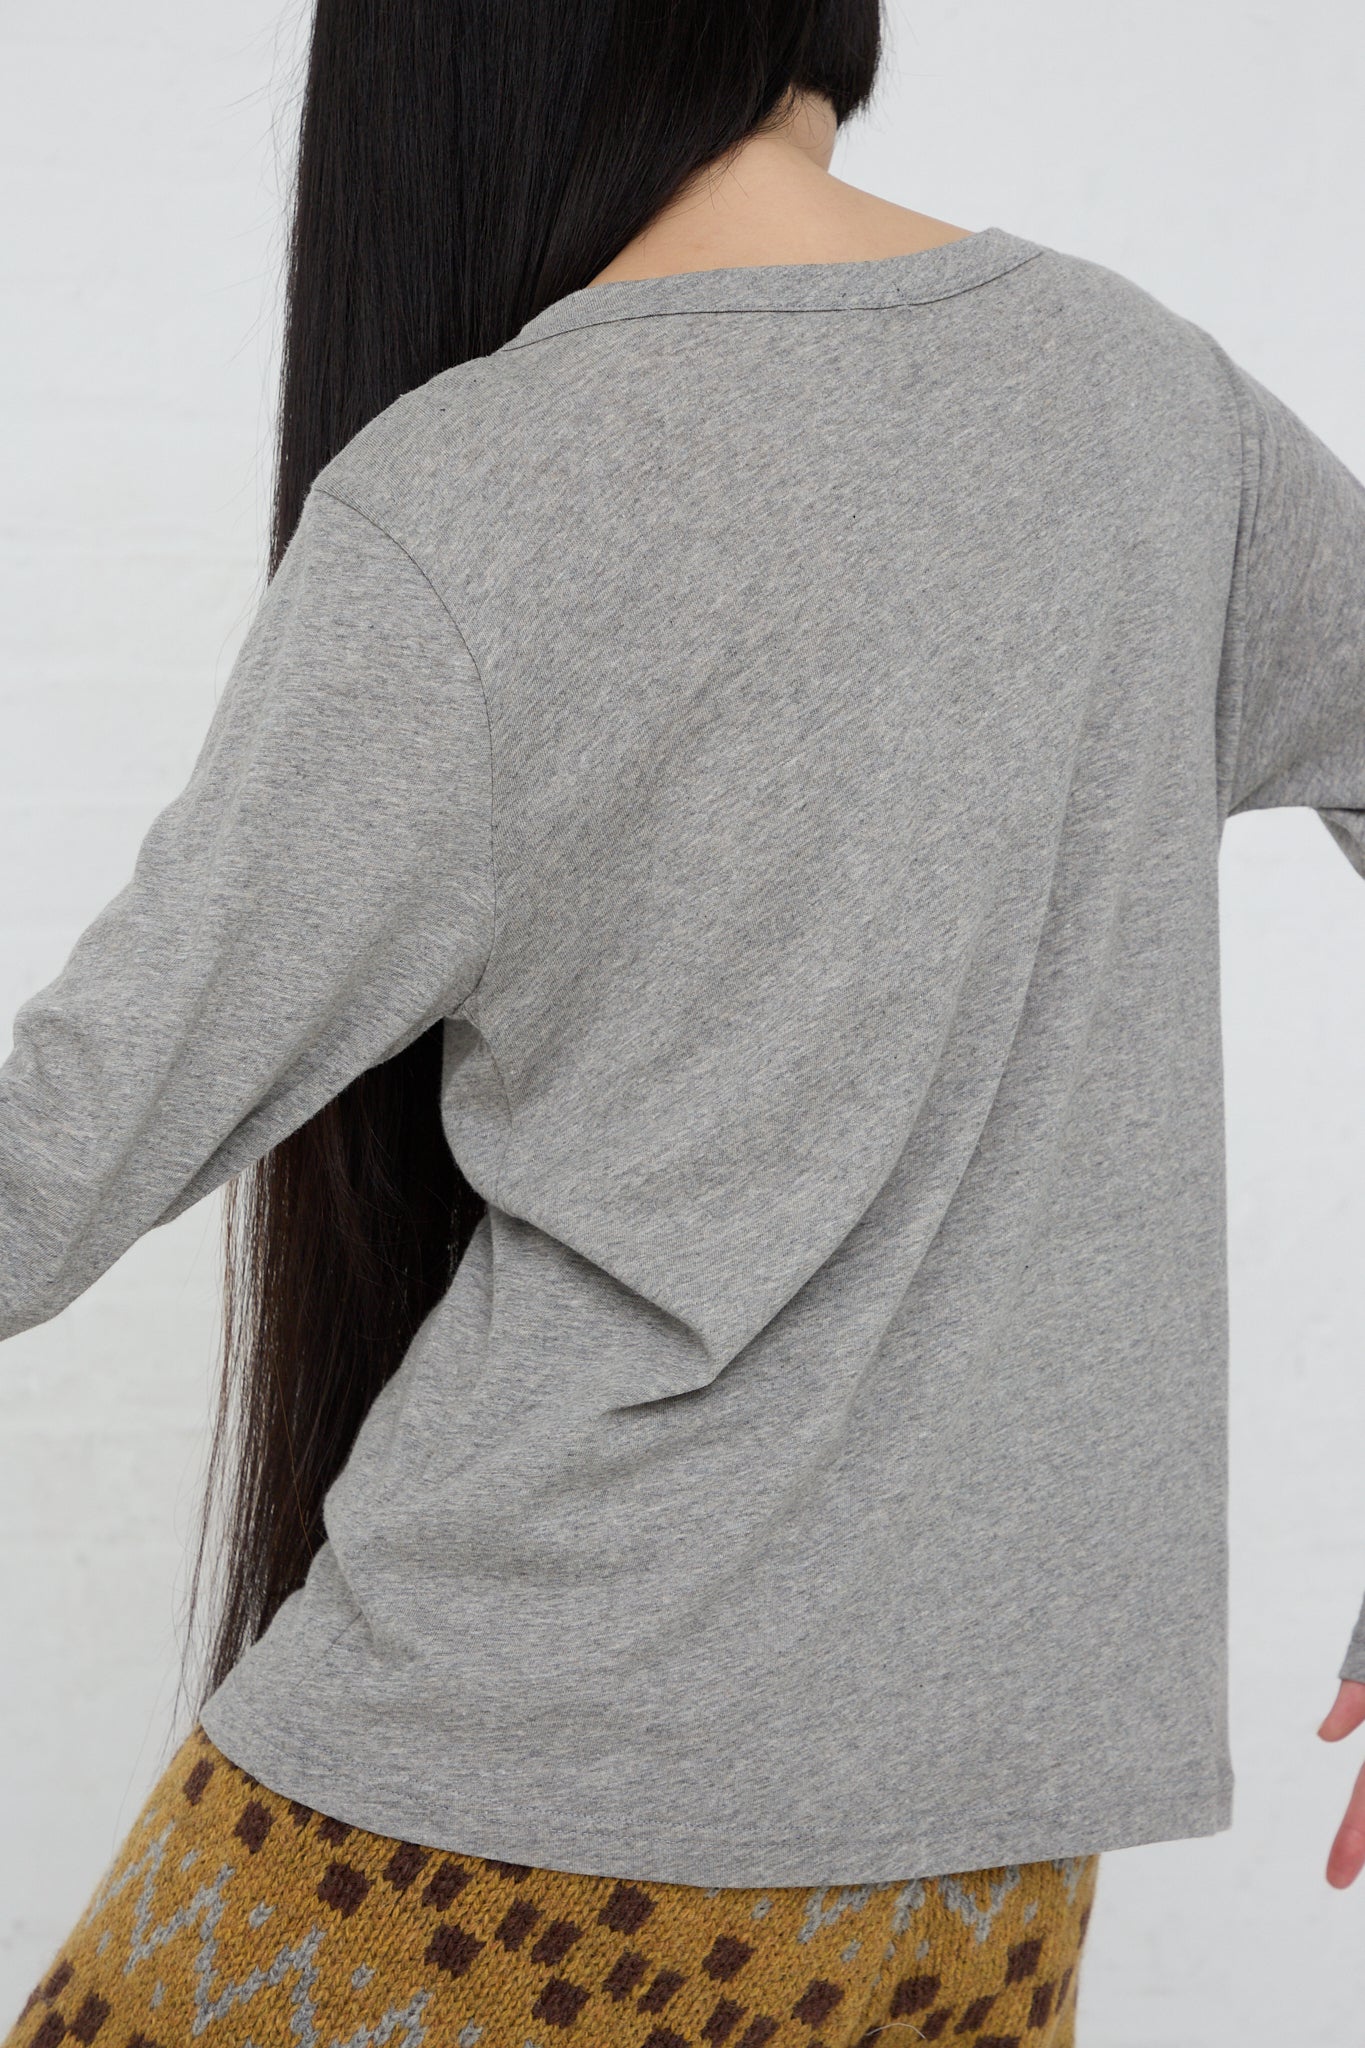 A woman wearing a gray long-sleeved Cotton Knit Pullover by Ichi and a patterned skirt, styled in a relaxed fit. Back view.